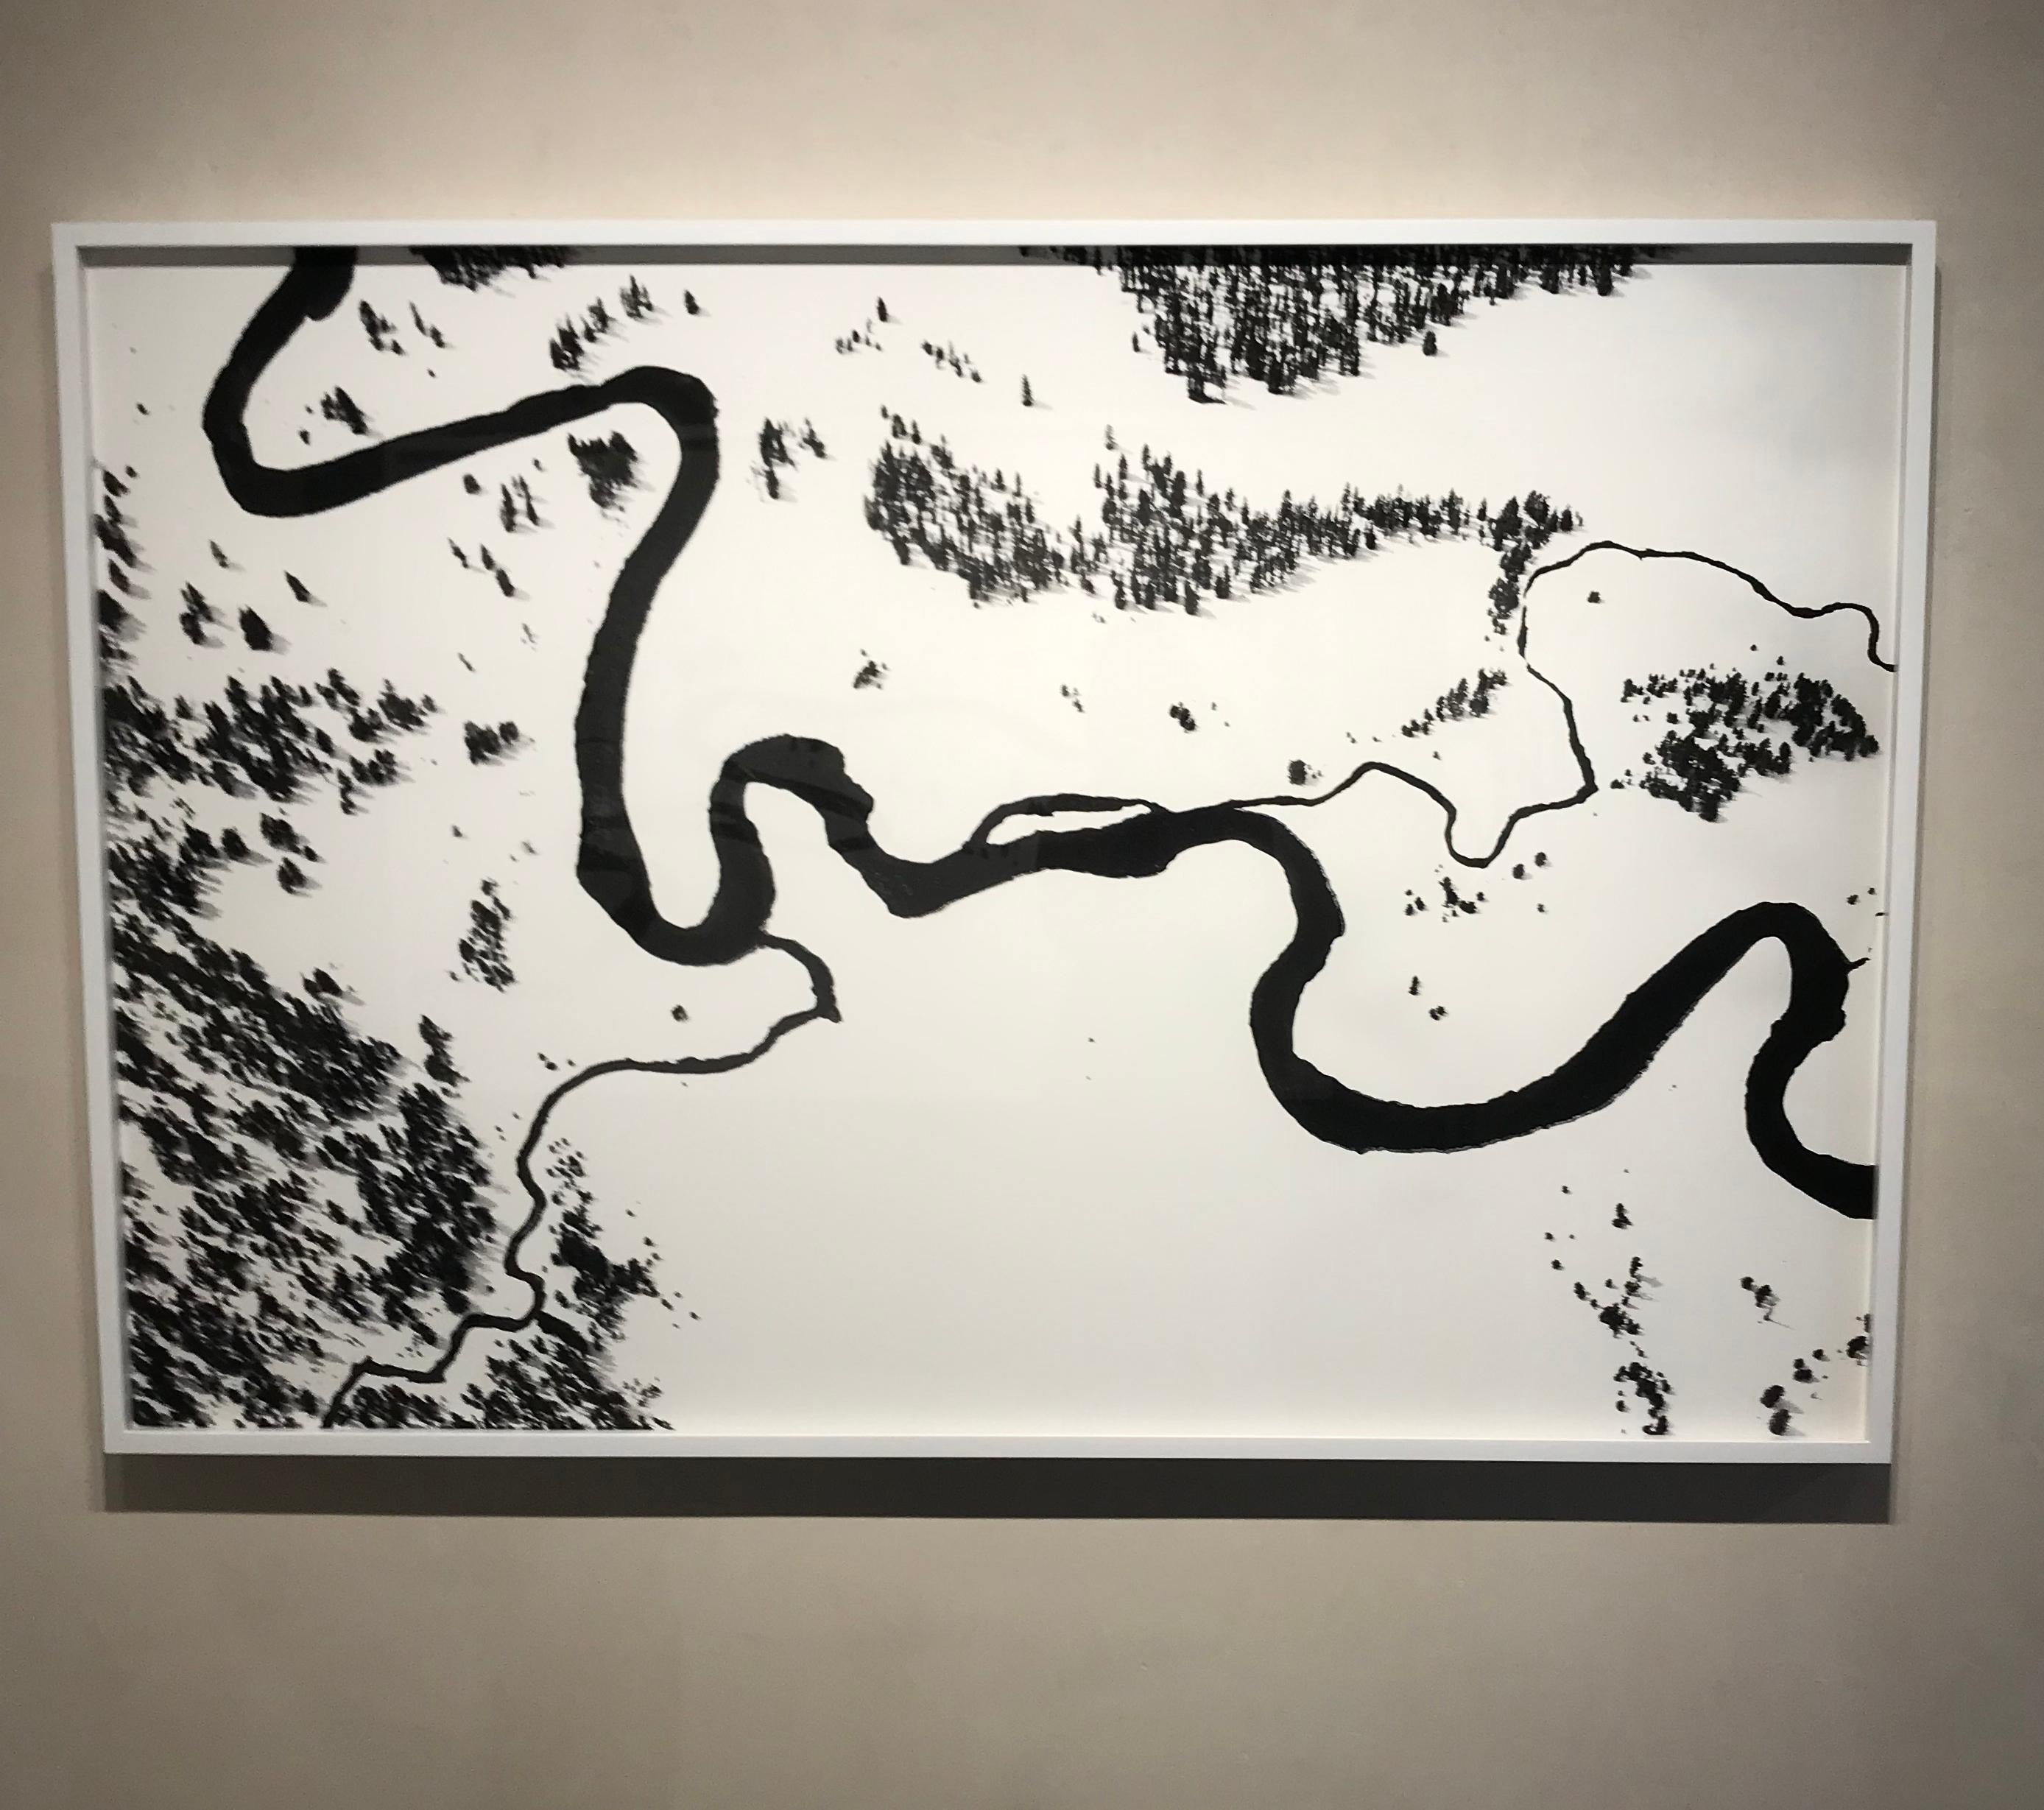 Waterline X - B&W aerial landscape framed photograph 40 x 60 inches  - Photograph by Tuck Fauntleroy